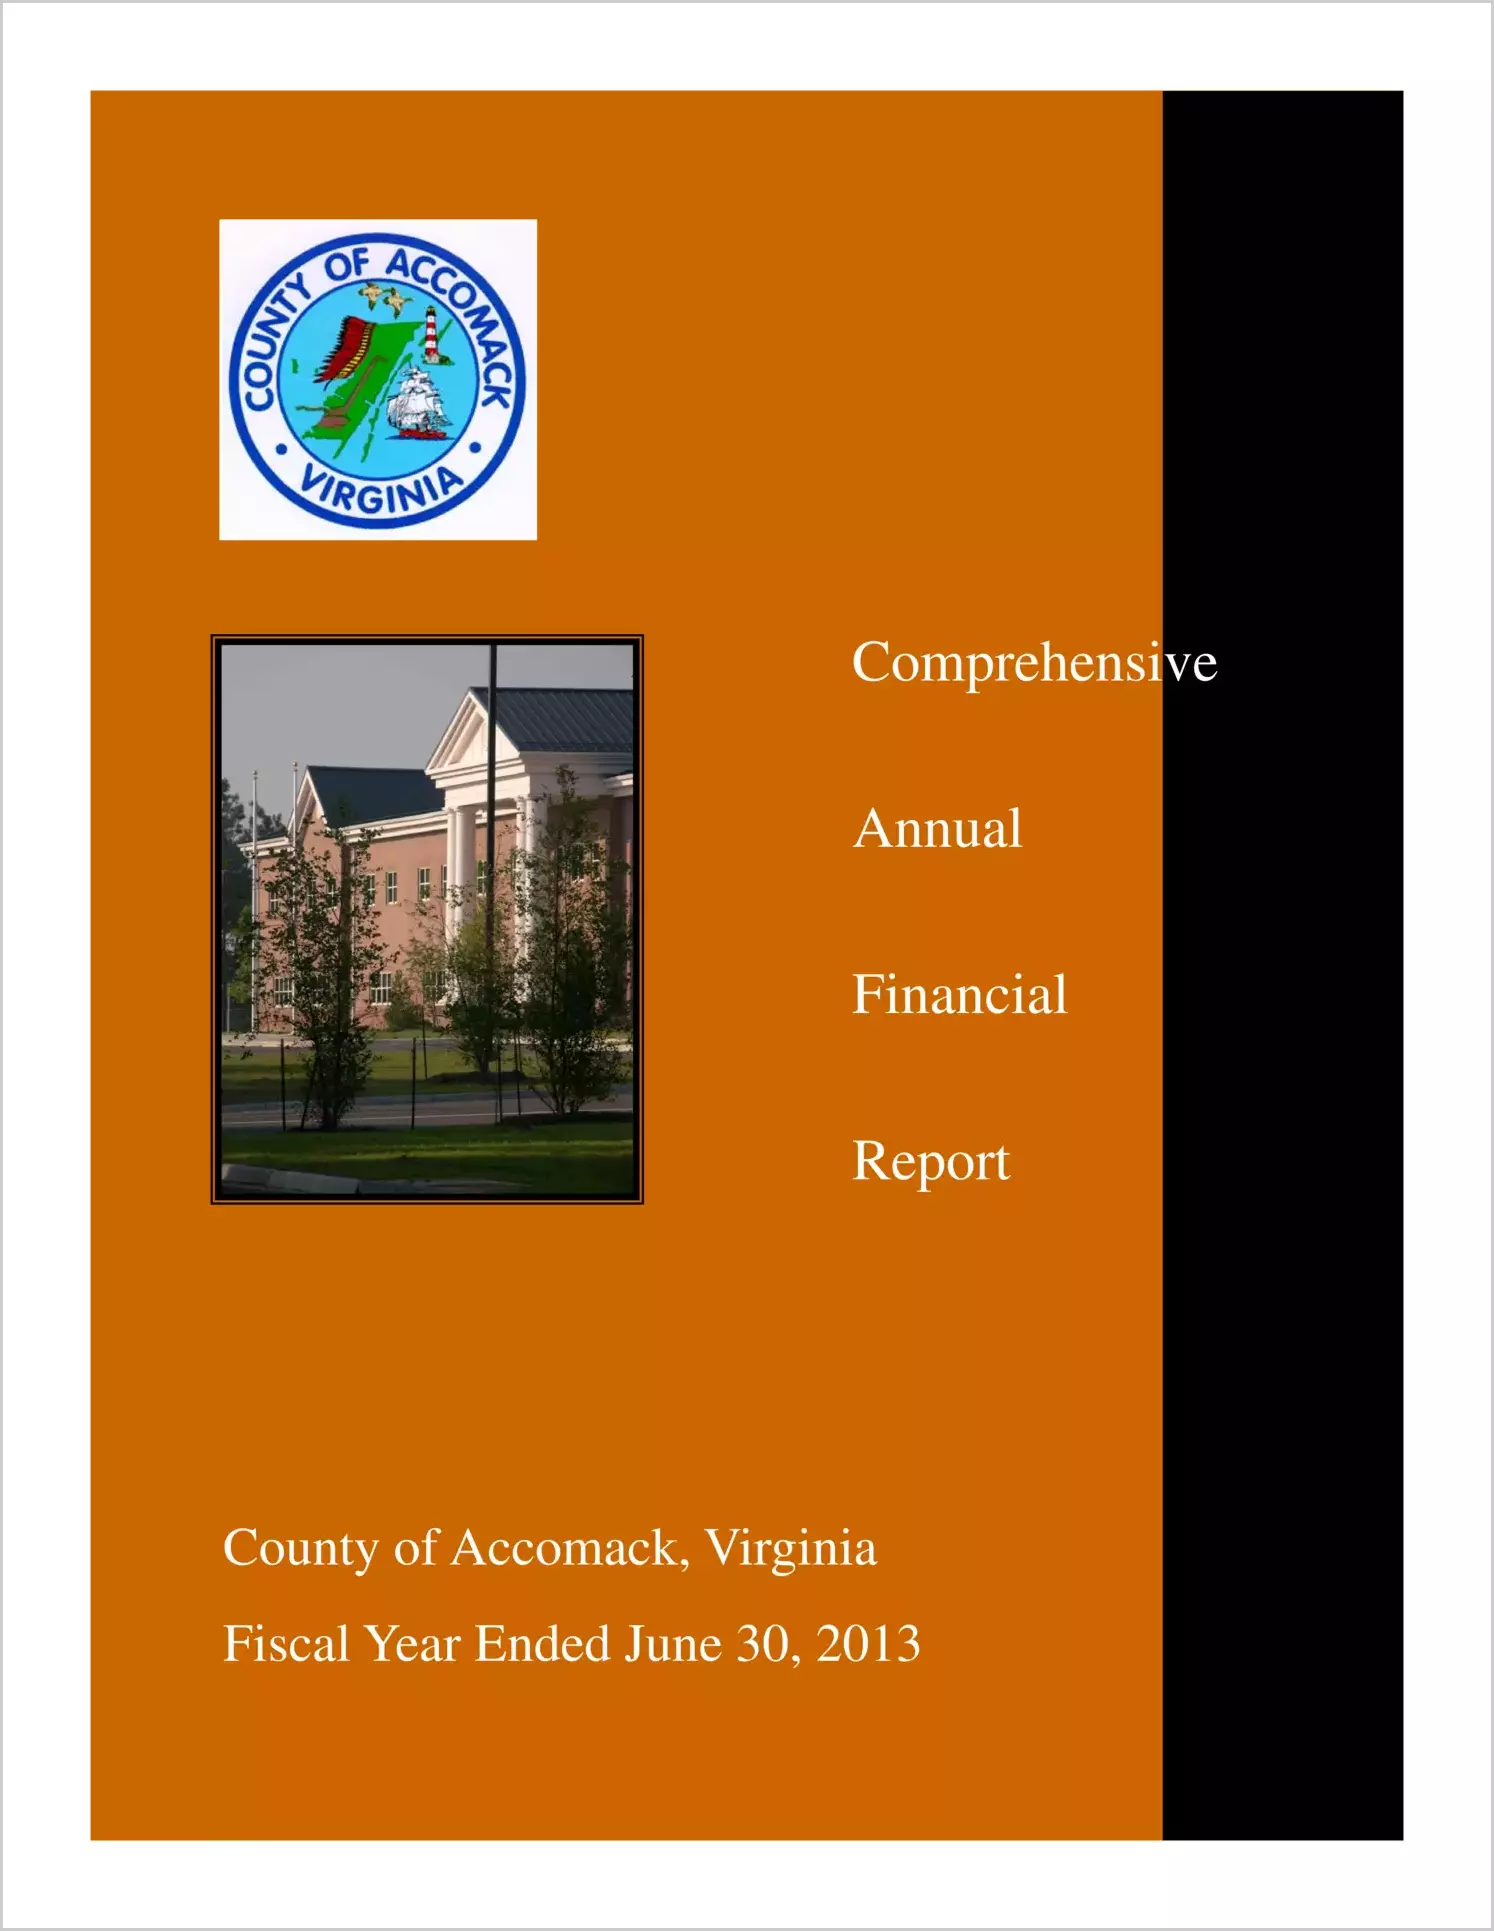 2013 Annual Financial Report for County of Accomack